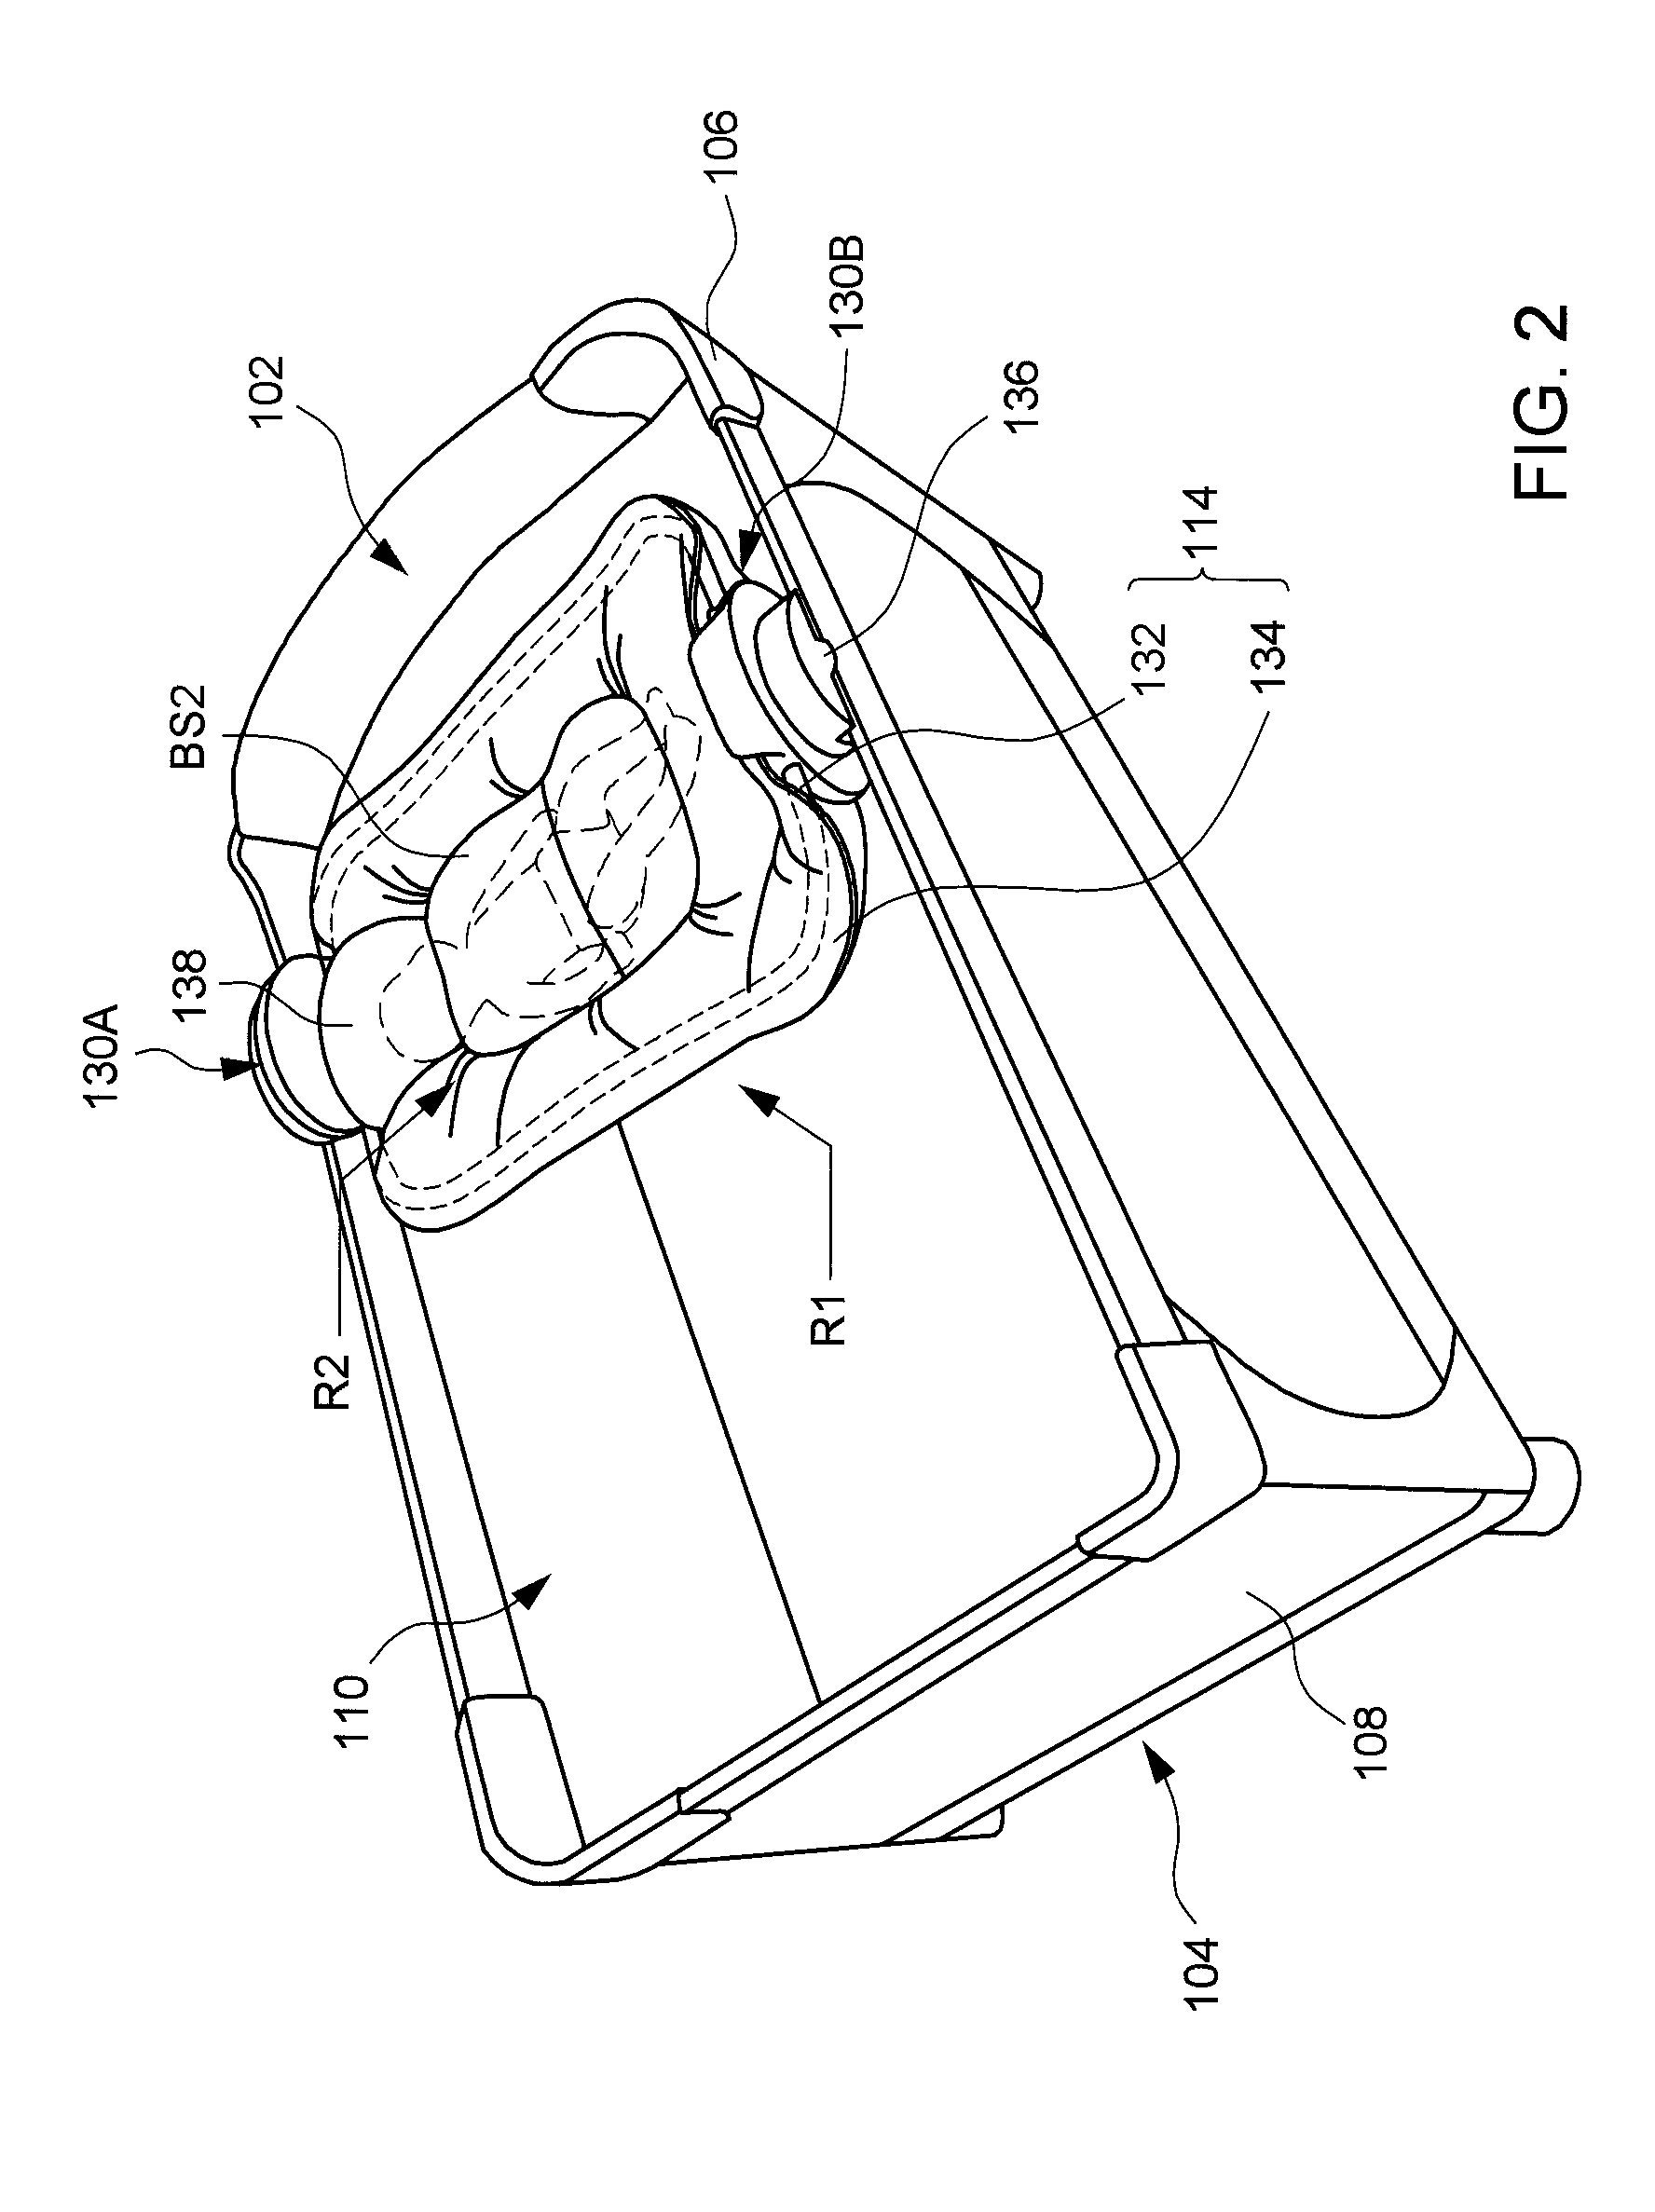 Child holding accessory suitable for use with a play yard